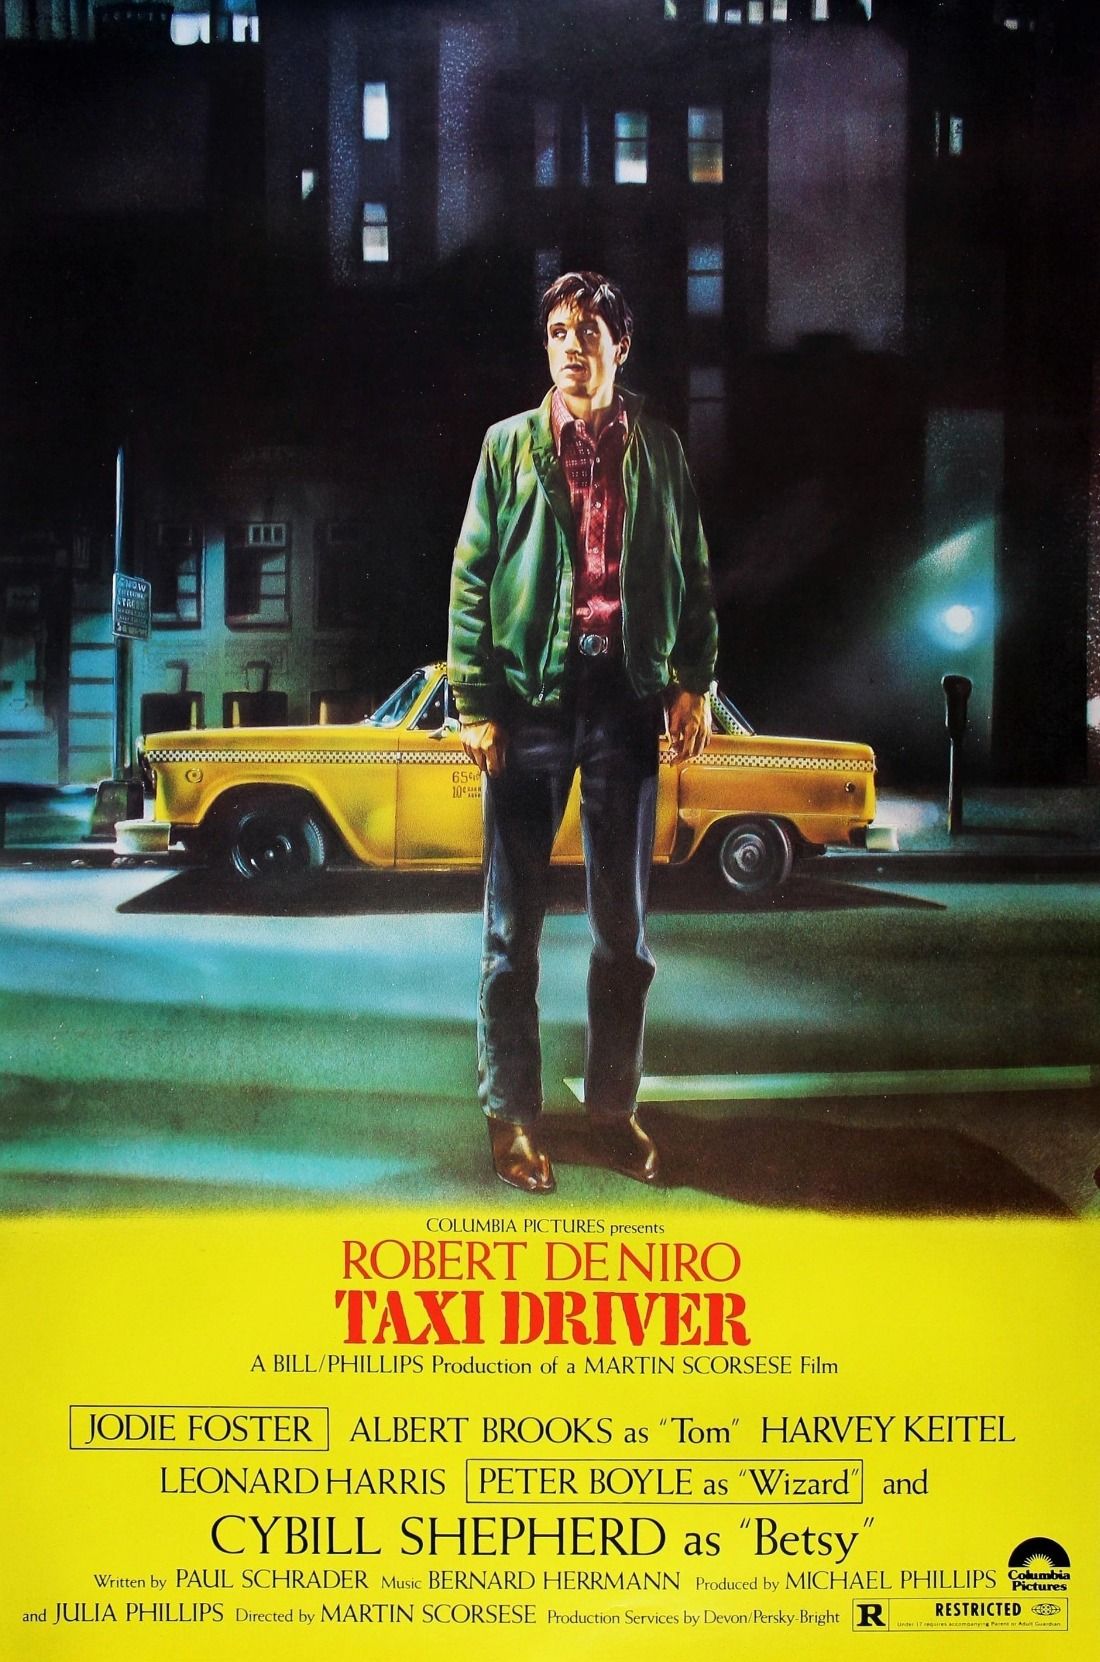 One Night Only: 'Taxi Driver'